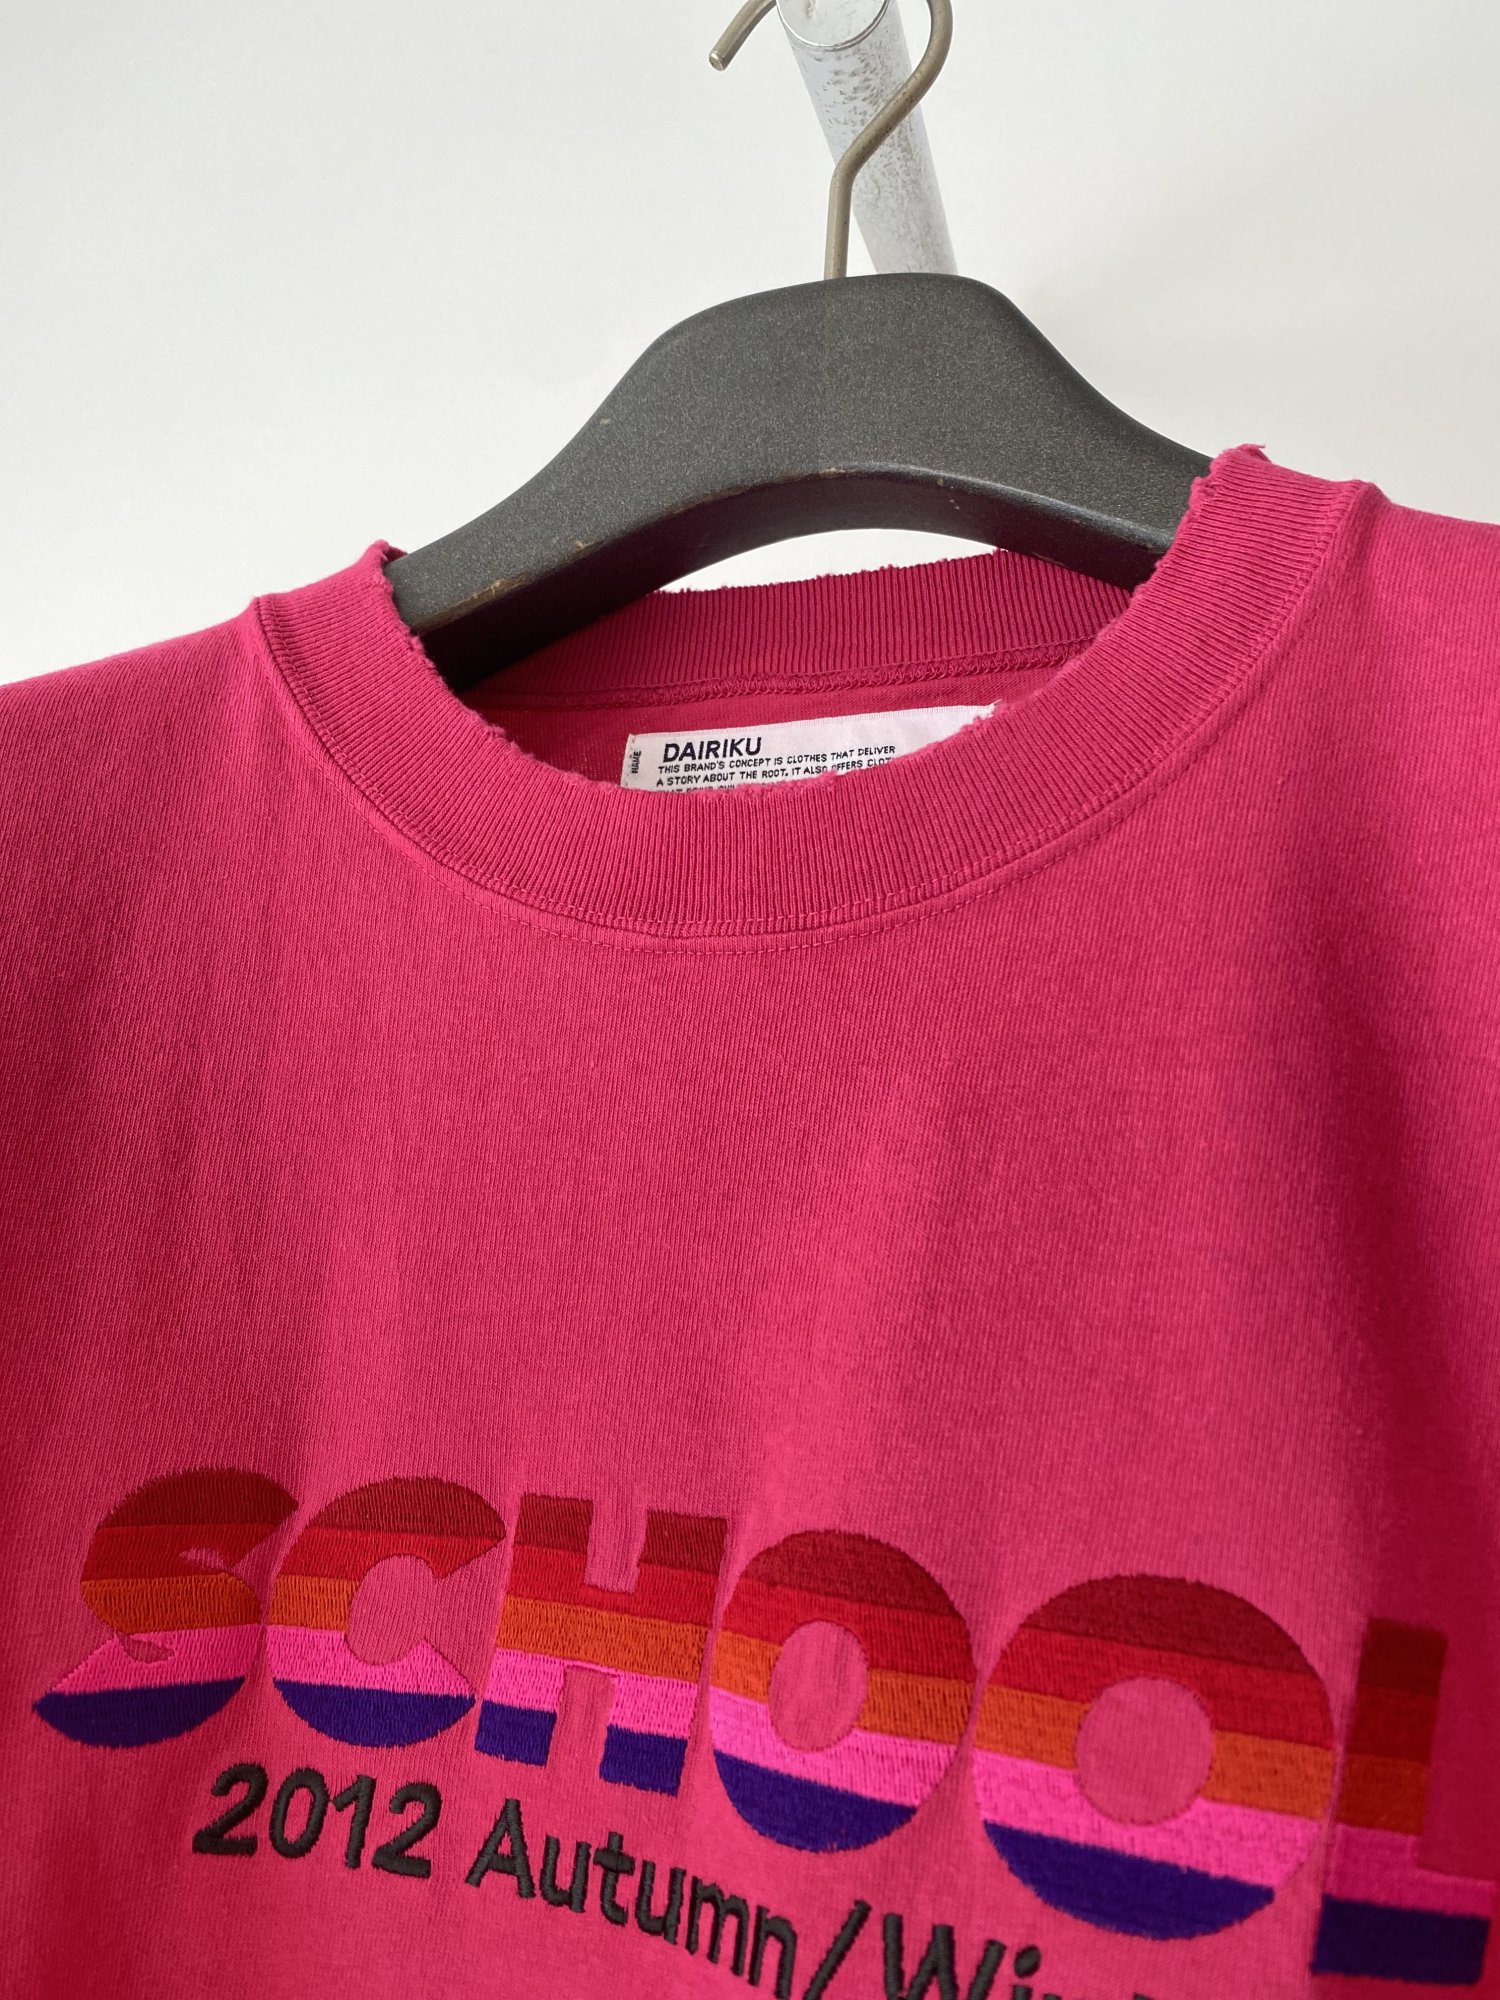 DAIRIKU<br />SCHOOL Embroidery Vintage Tee / Vintage Pink<img class='new_mark_img2' src='https://img.shop-pro.jp/img/new/icons14.gif' style='border:none;display:inline;margin:0px;padding:0px;width:auto;' />